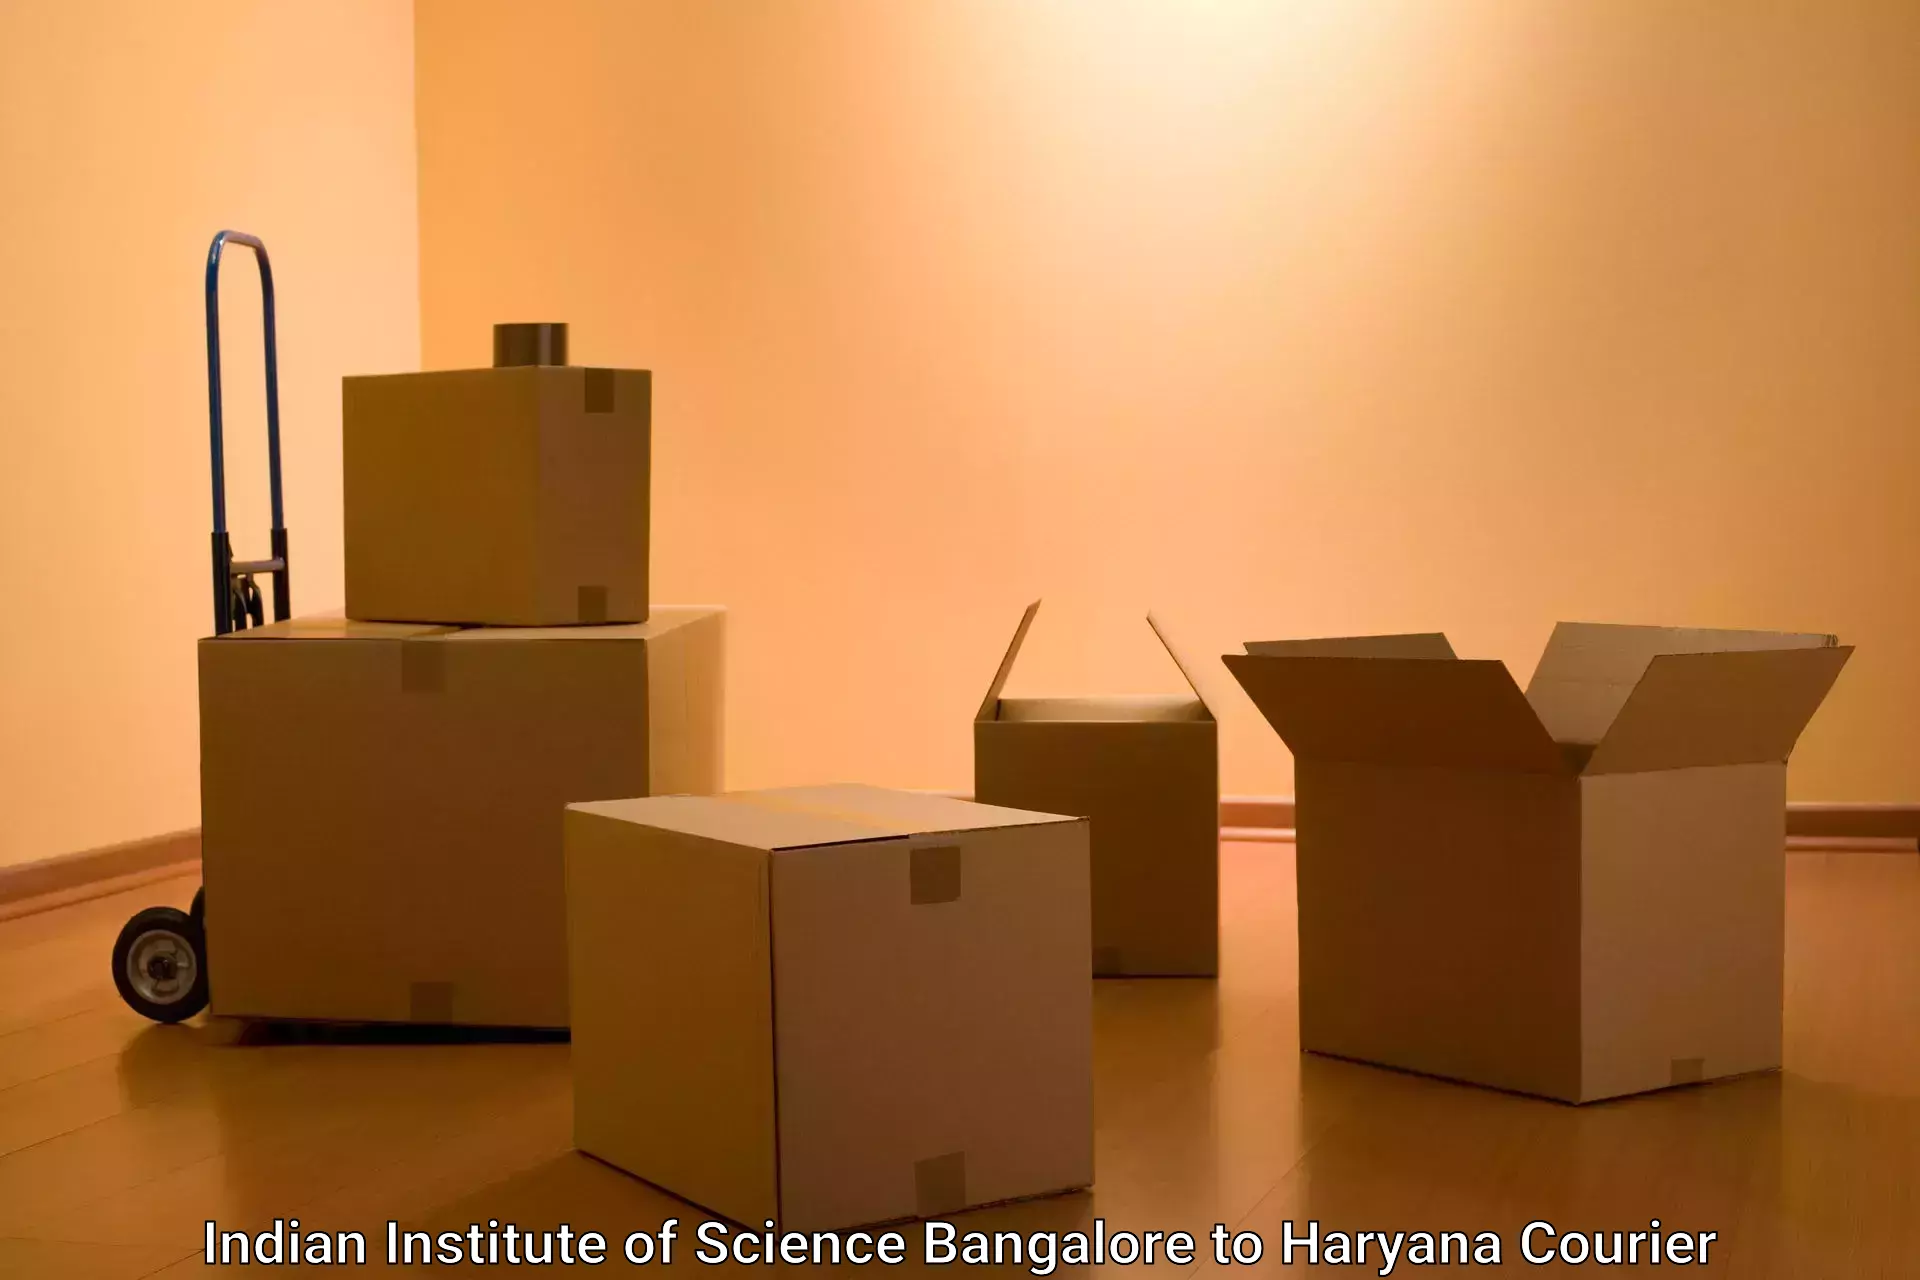 Global shipping solutions Indian Institute of Science Bangalore to Bilaspur Haryana